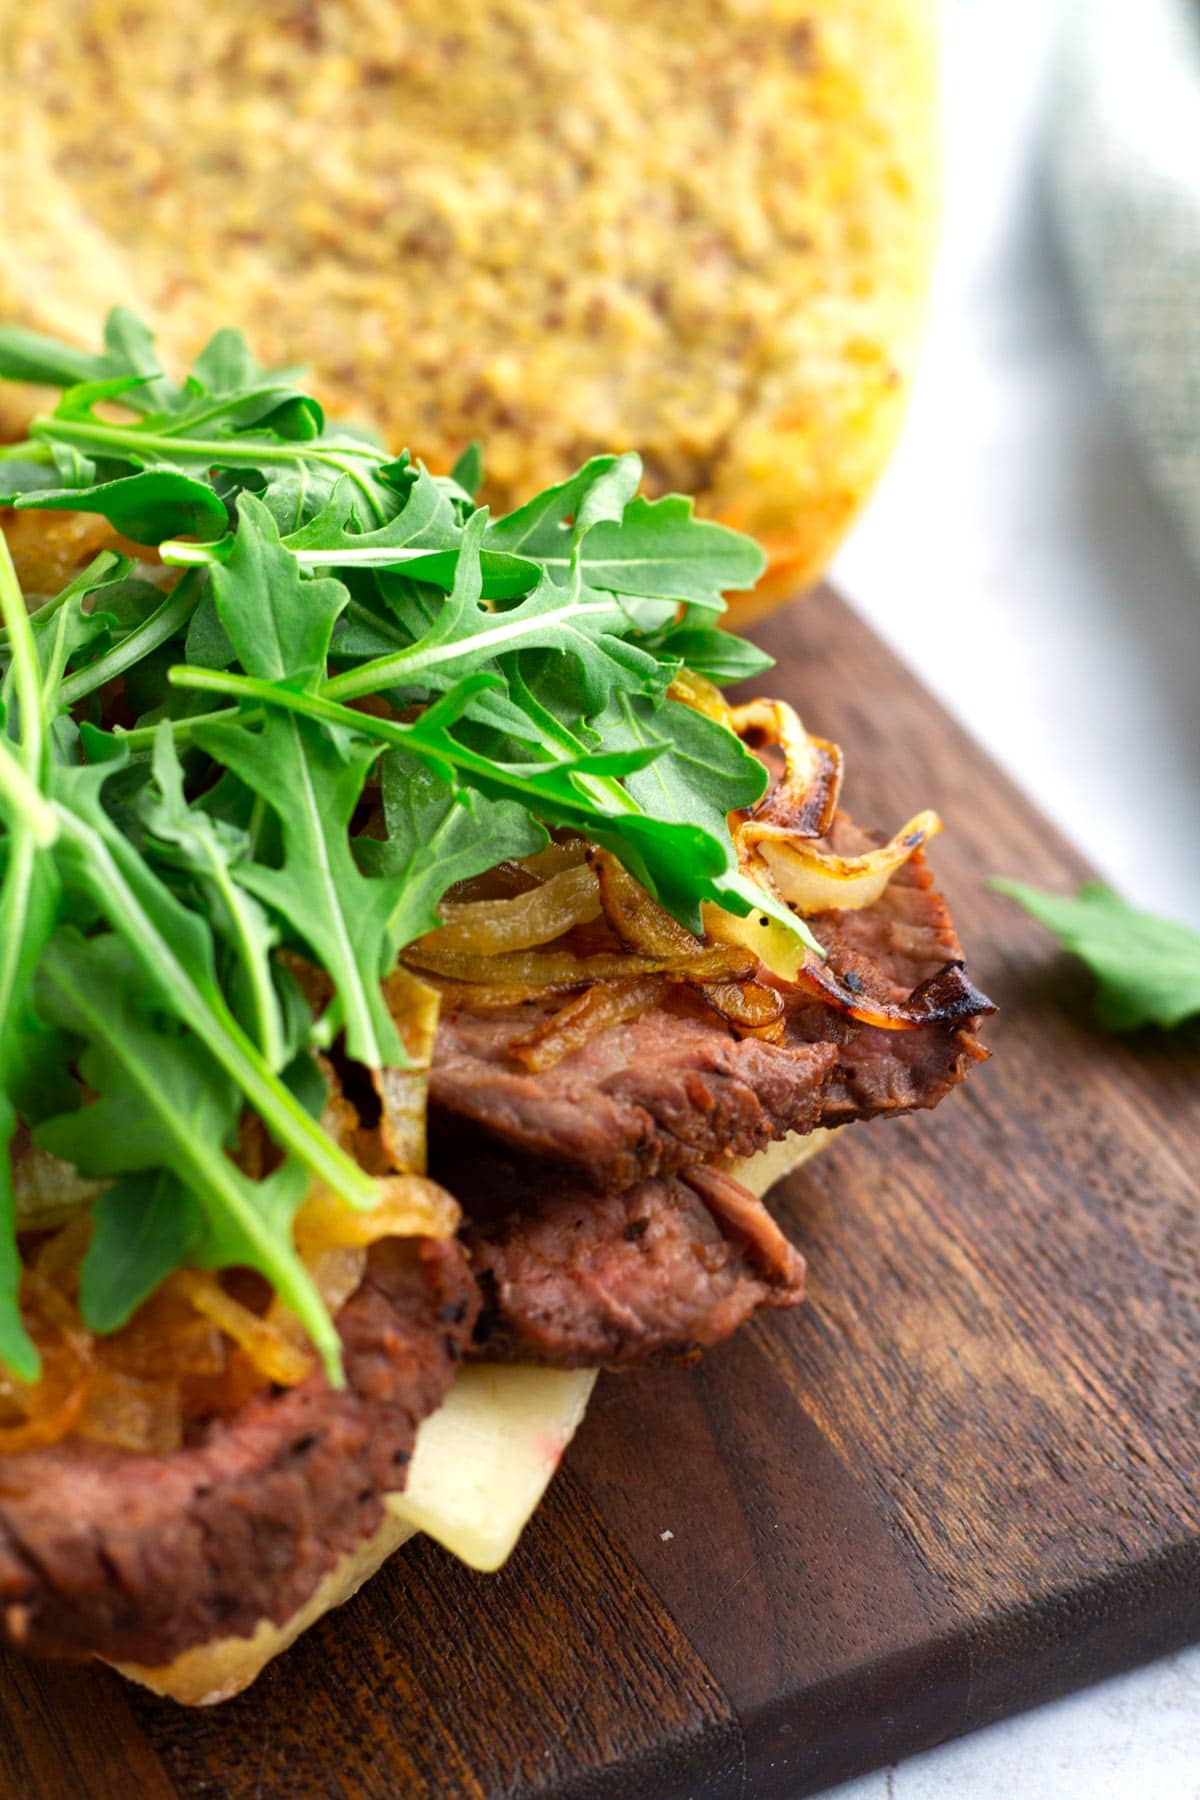 Open faced leftover tri tip sandwich with arugula on top, onions underneath, and extra bread in the background.